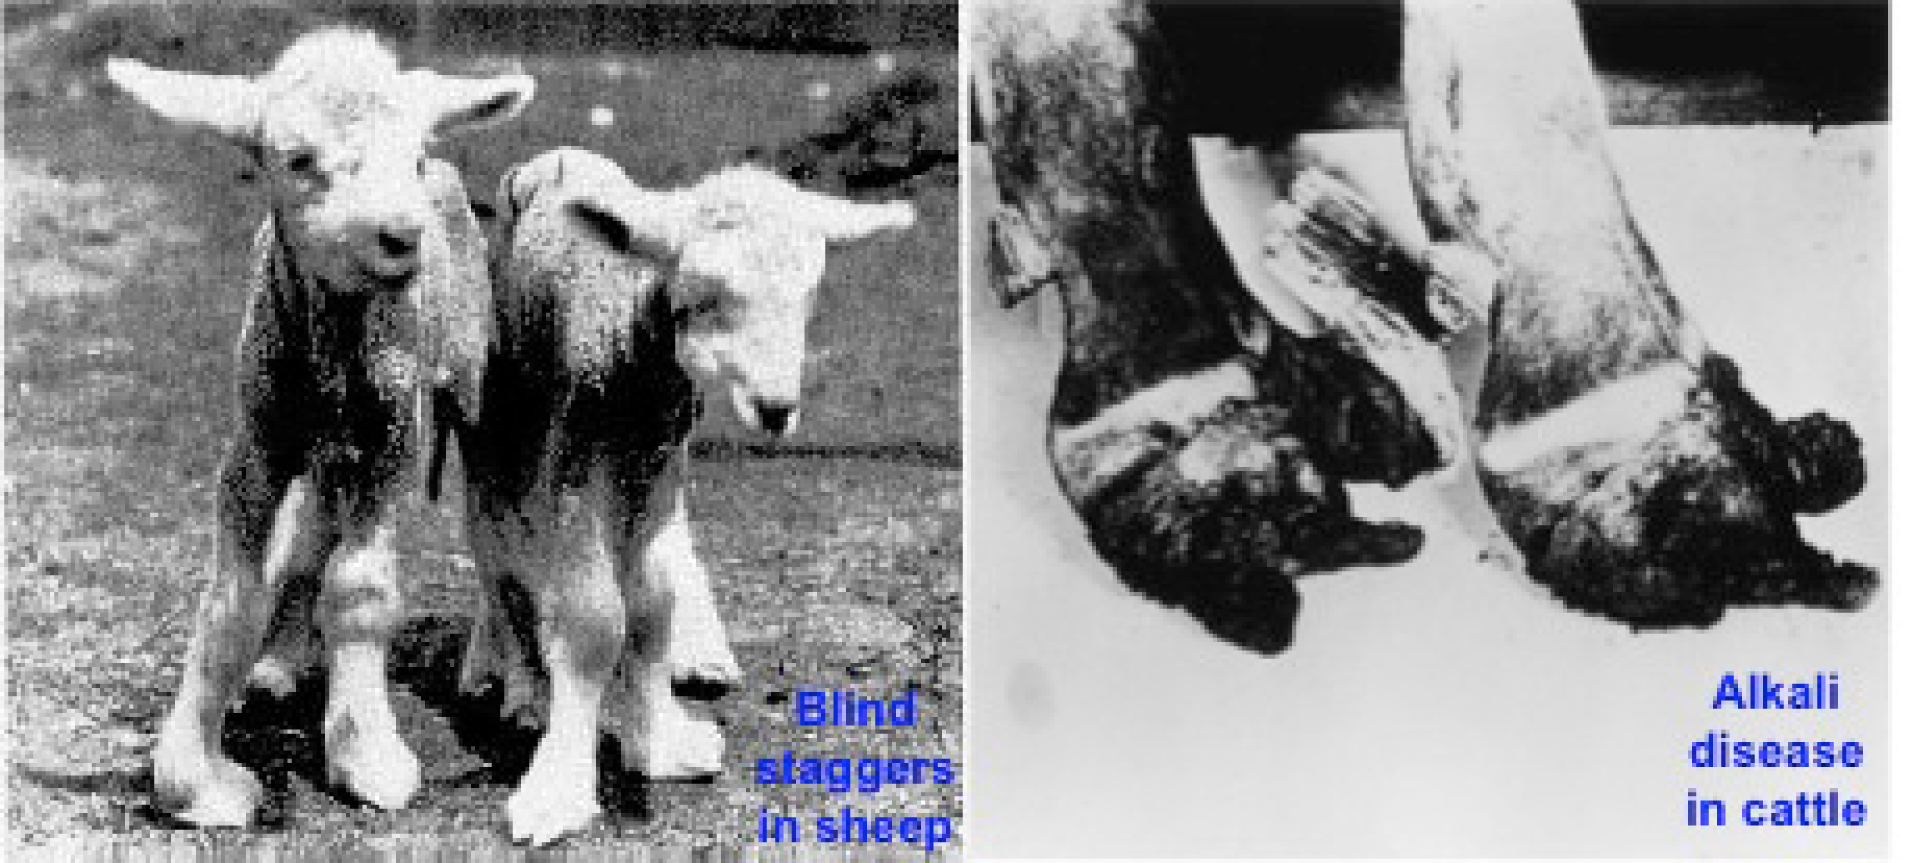 Figure10. Blind staggers in sheep caused by acute selenium toxicity (left) and Alkali disease in cattle (right) caused by chronic Se toxicity.
Note the severely damaged hoofs resulting from Se excess.